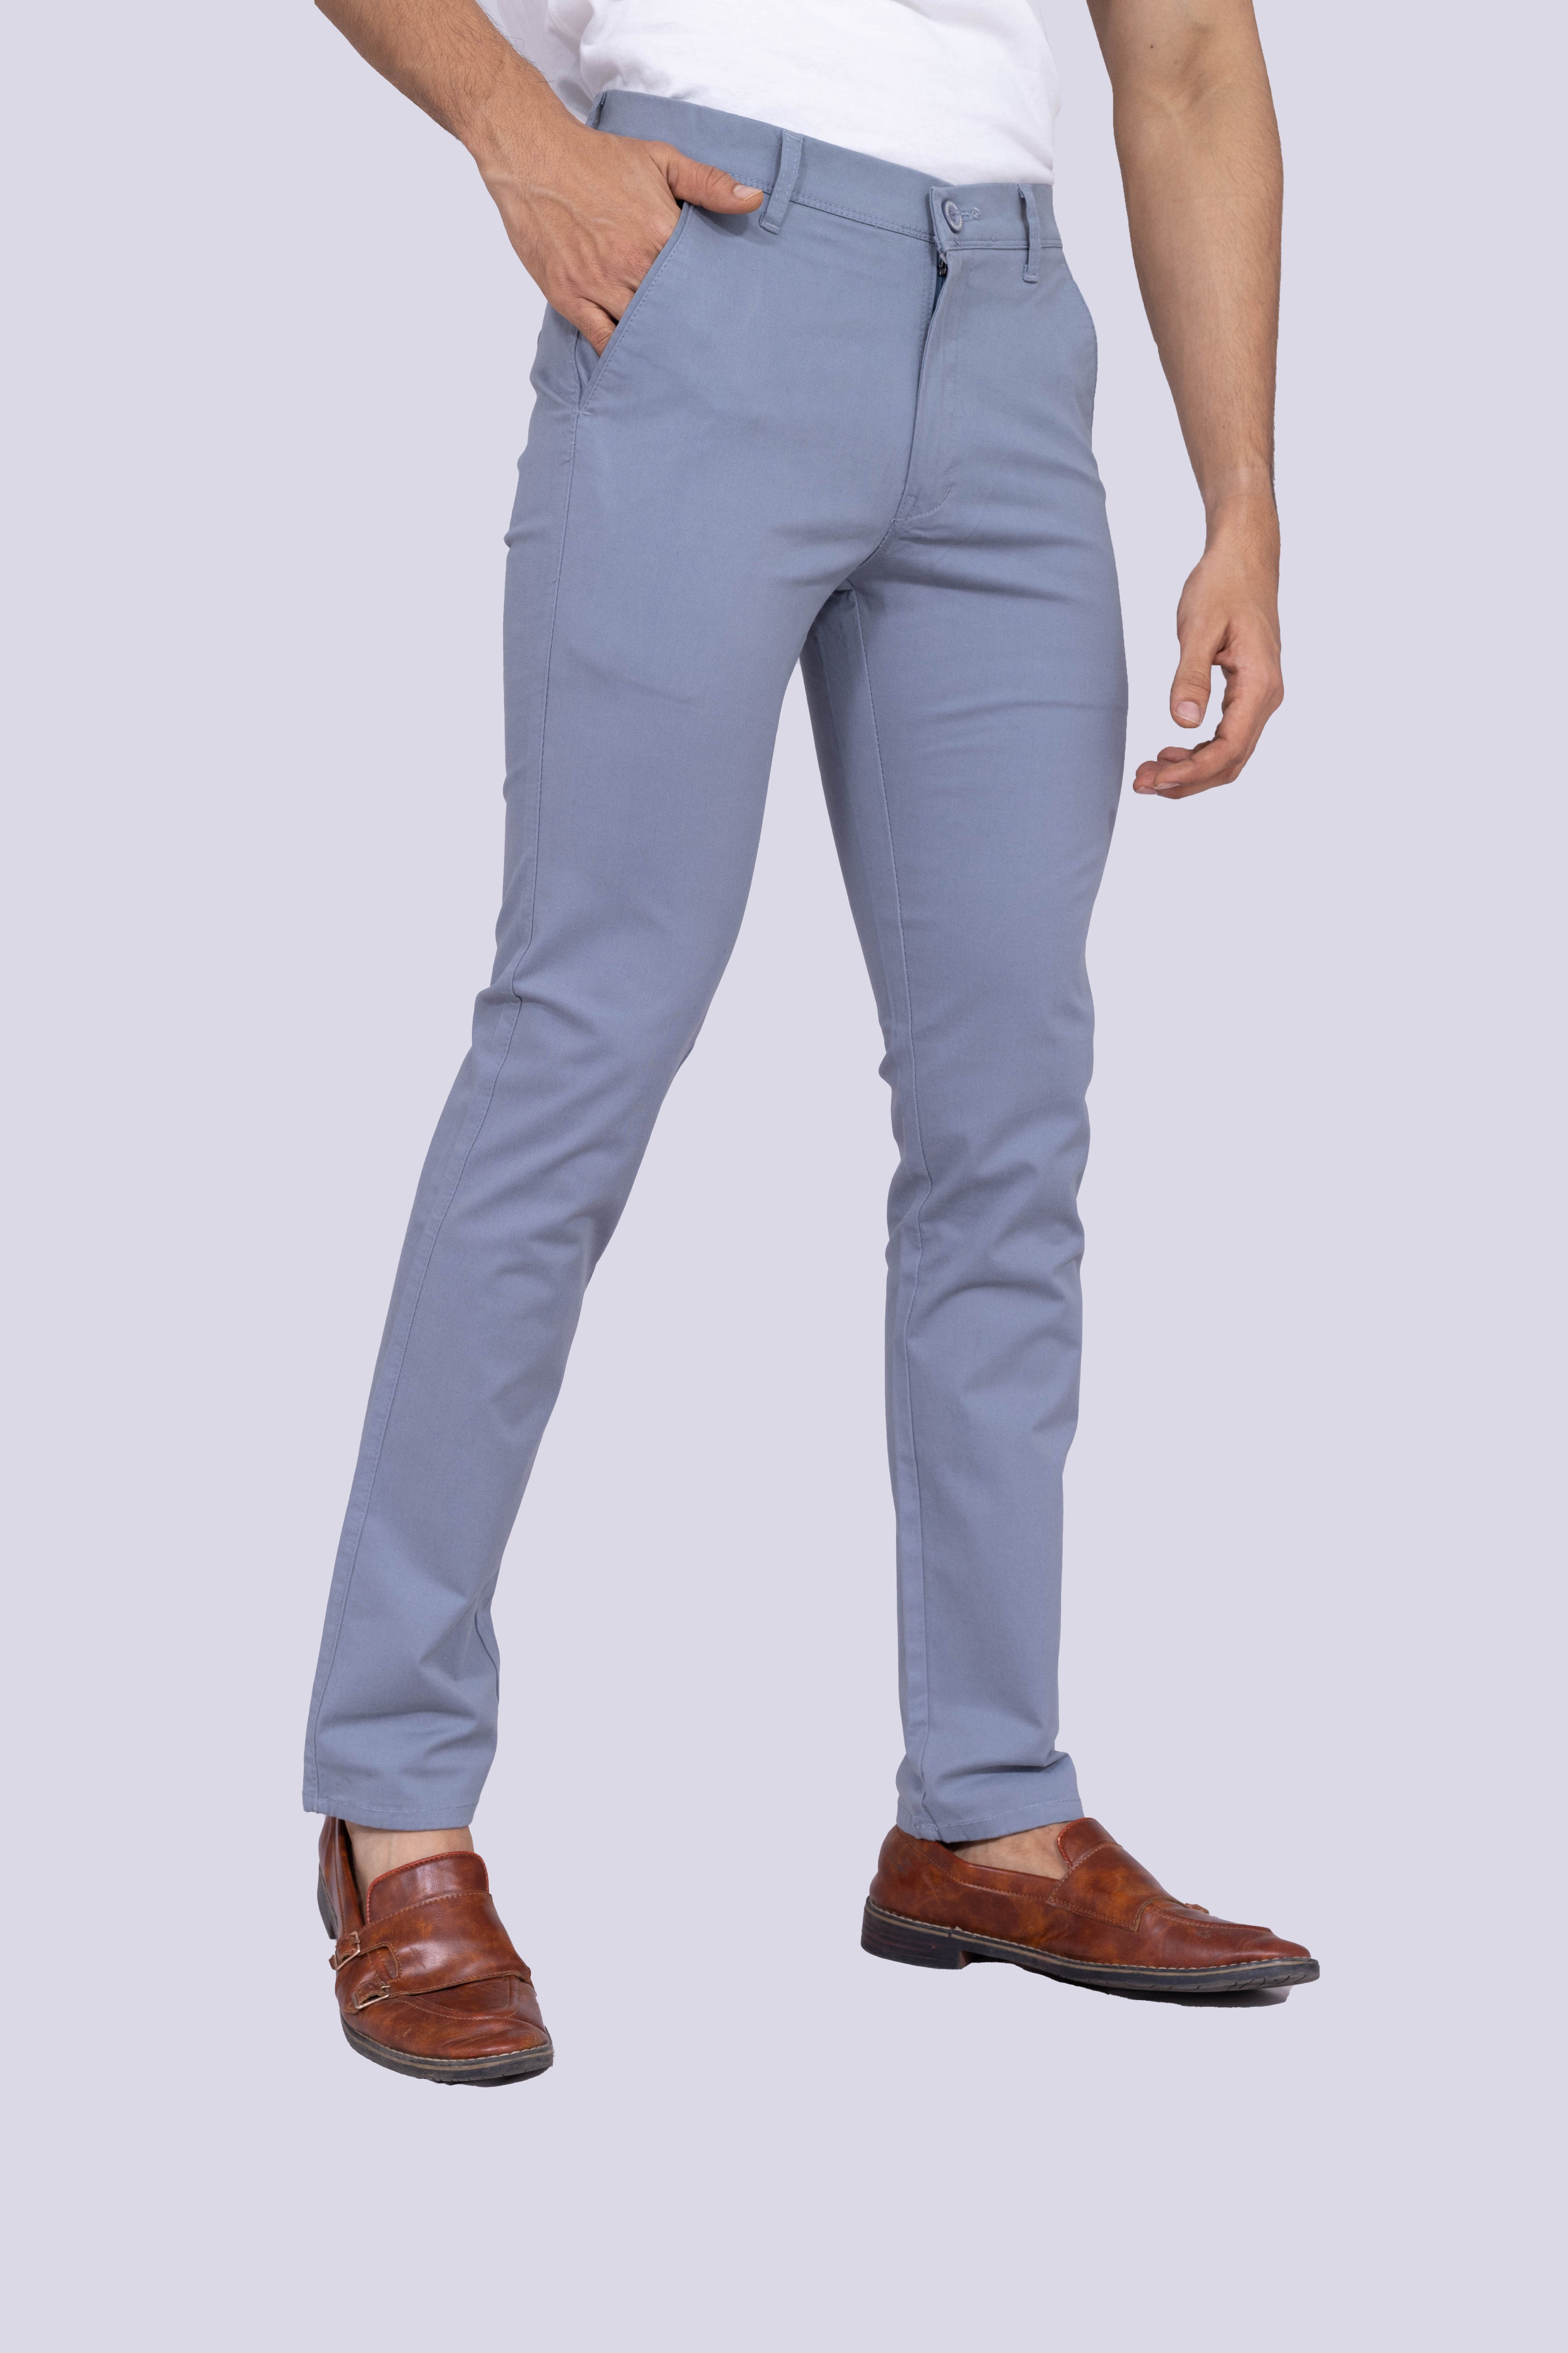 Mid Toned Grey Regular Fit Cotton Chinos